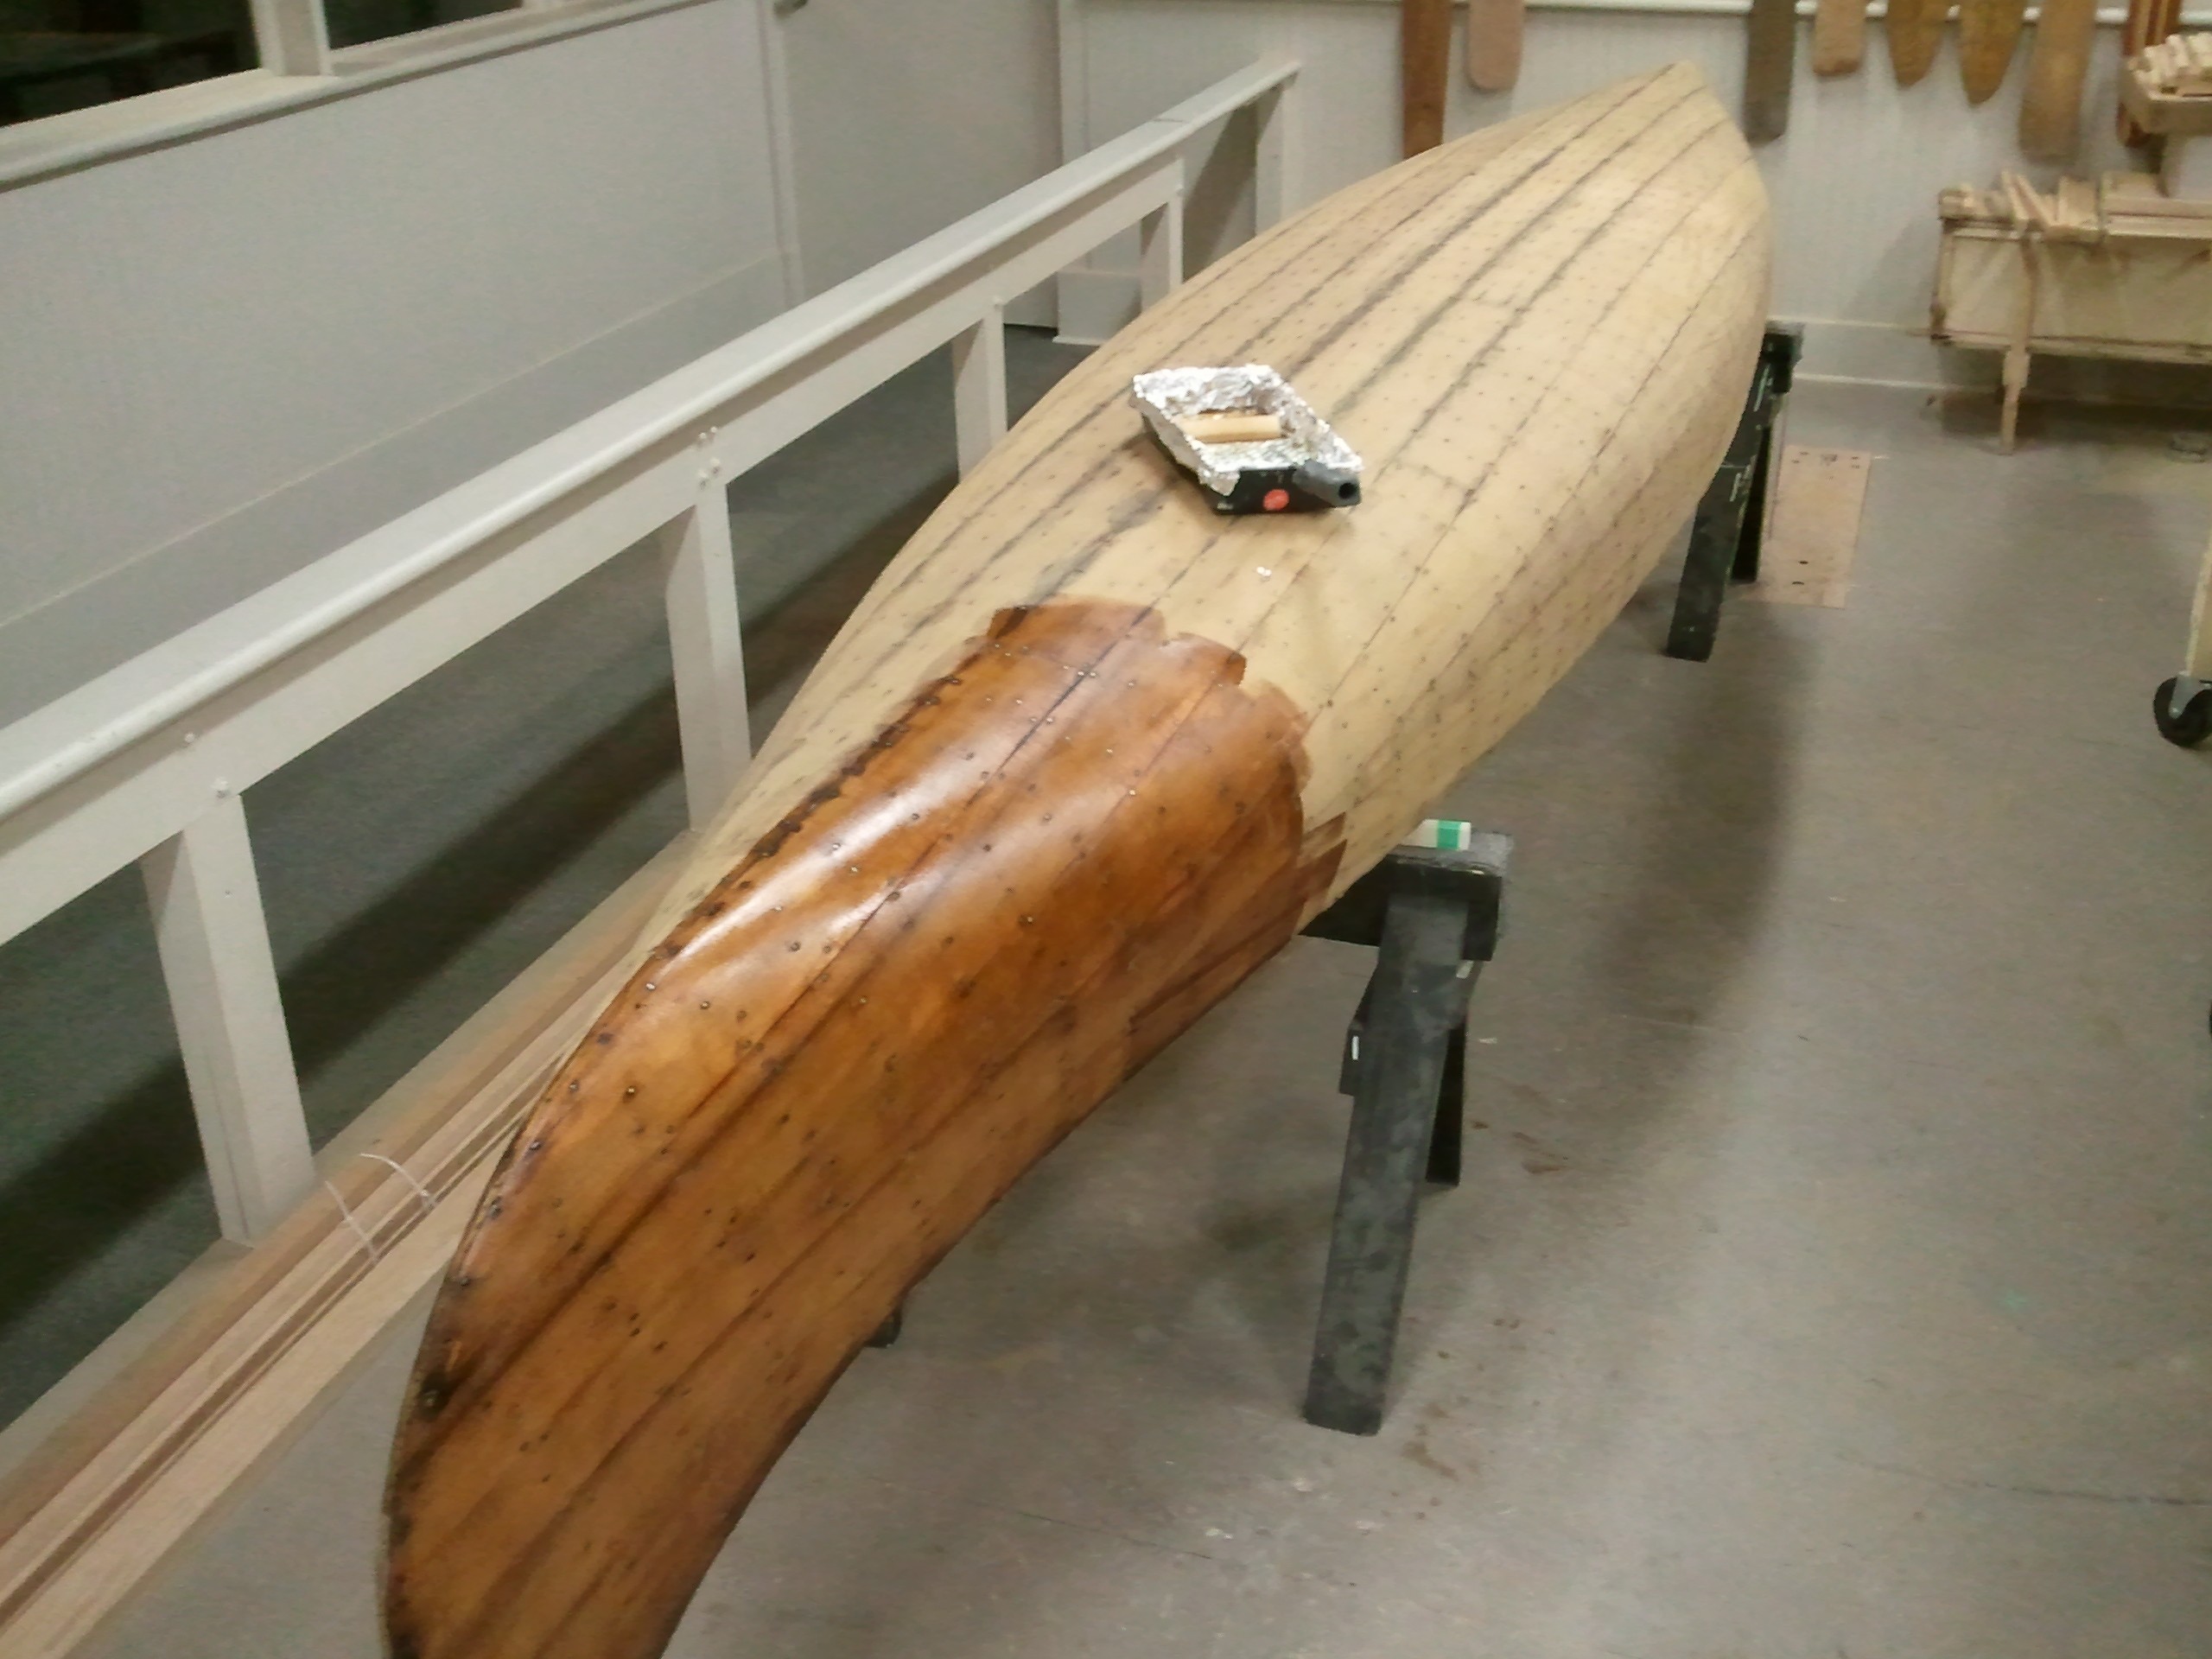 re-canvassing a 1937 old town canoe, part 1 playing with